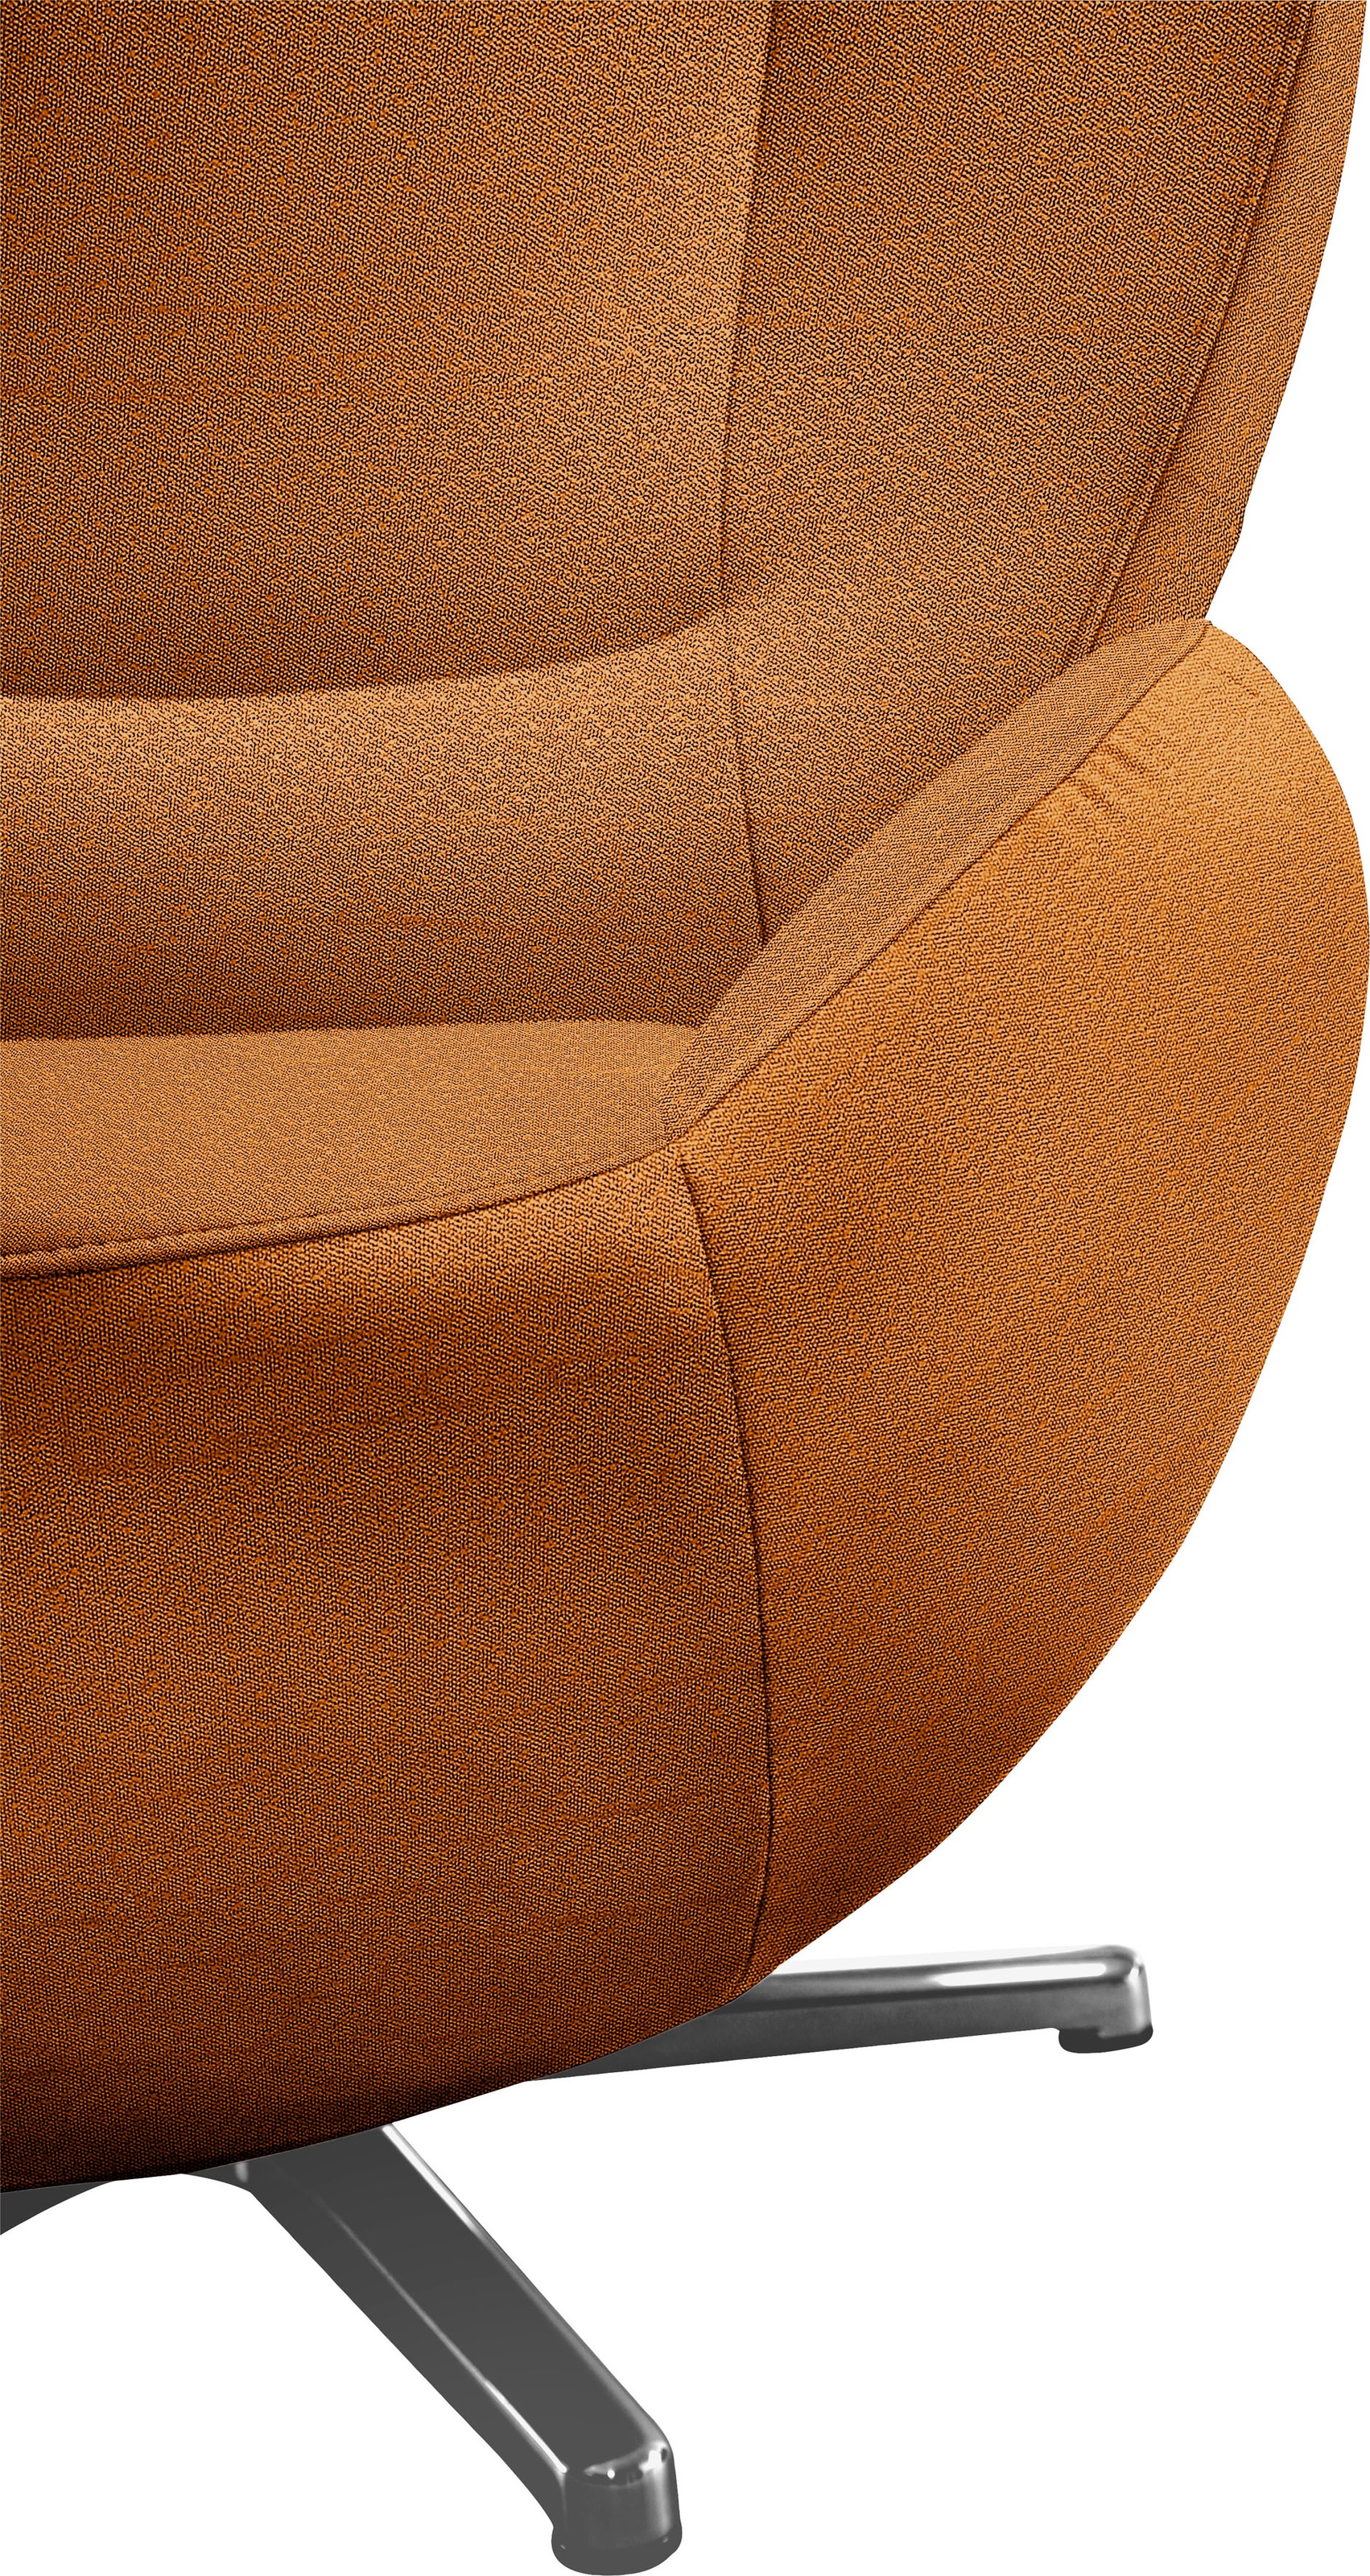 mit Metall-Drehfuß TAILOR Loungesessel | BAUR TOM in PURE«, Chrom »TOM HOME